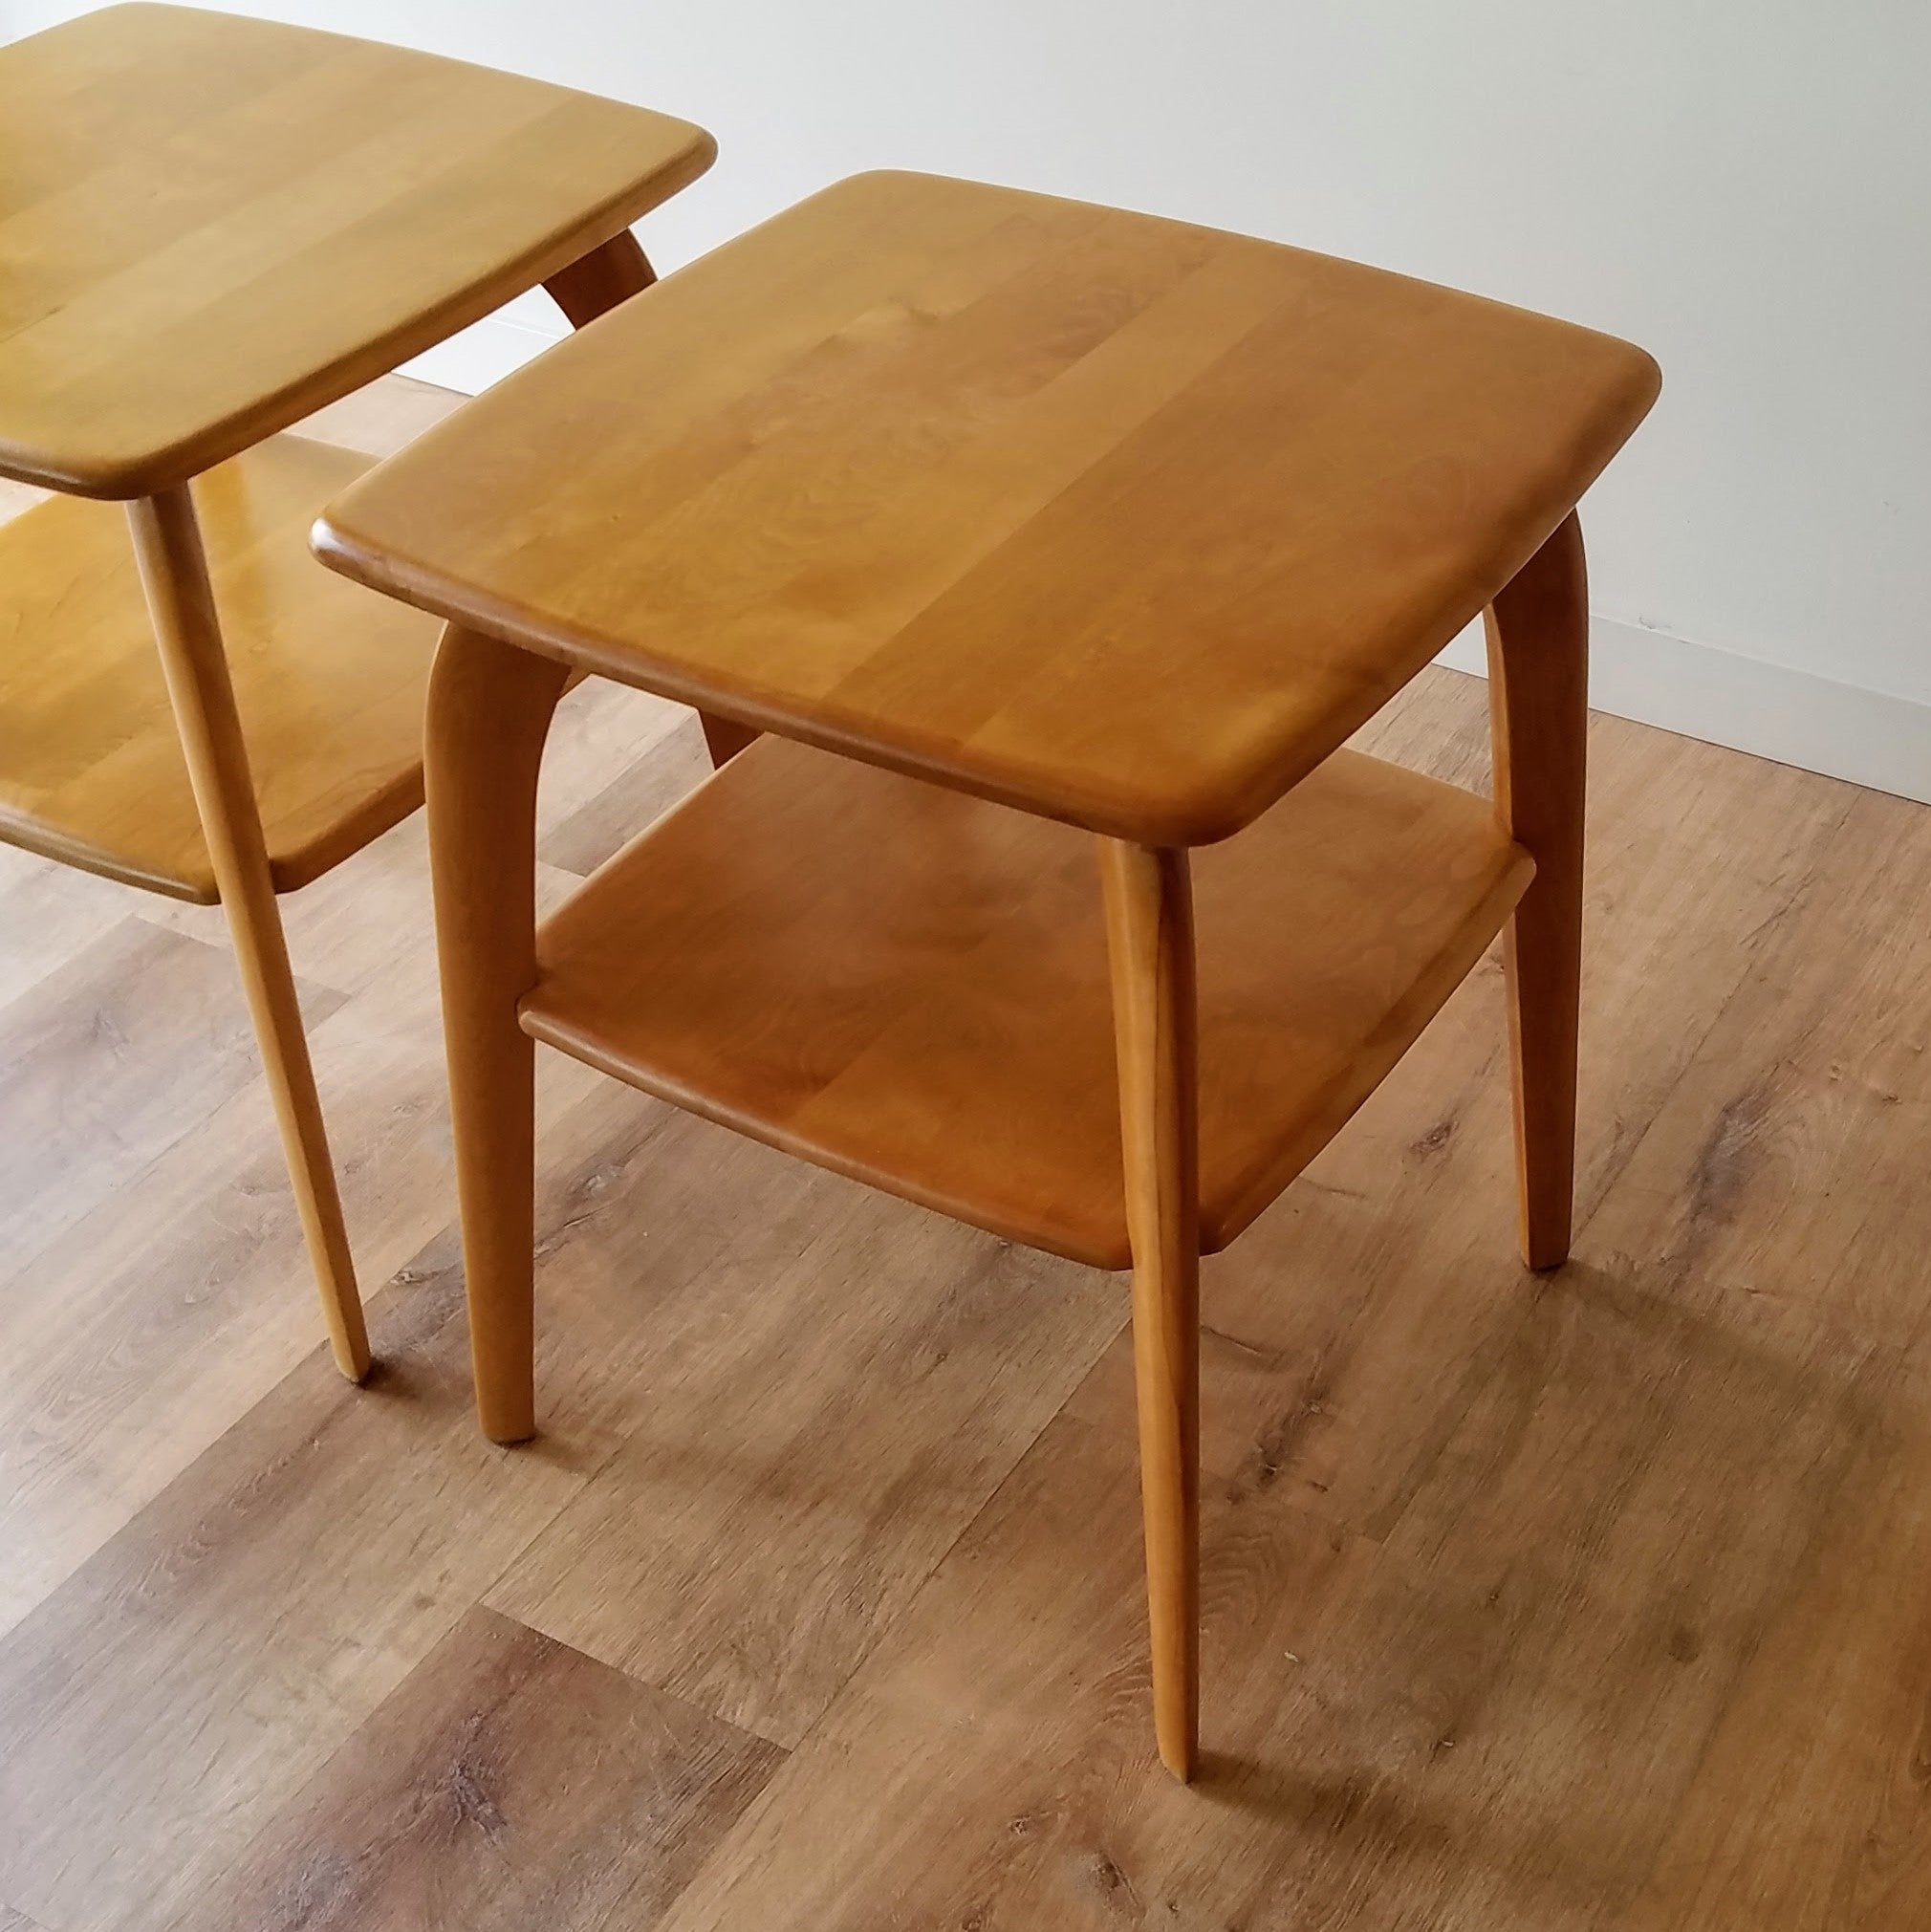 Quarter angle view of 1950s vintage birch lamp tables made by Heywood Wakefield, can be found at SPARKLEBARN, a fine furniture and furnishings store in Seattle,WA.